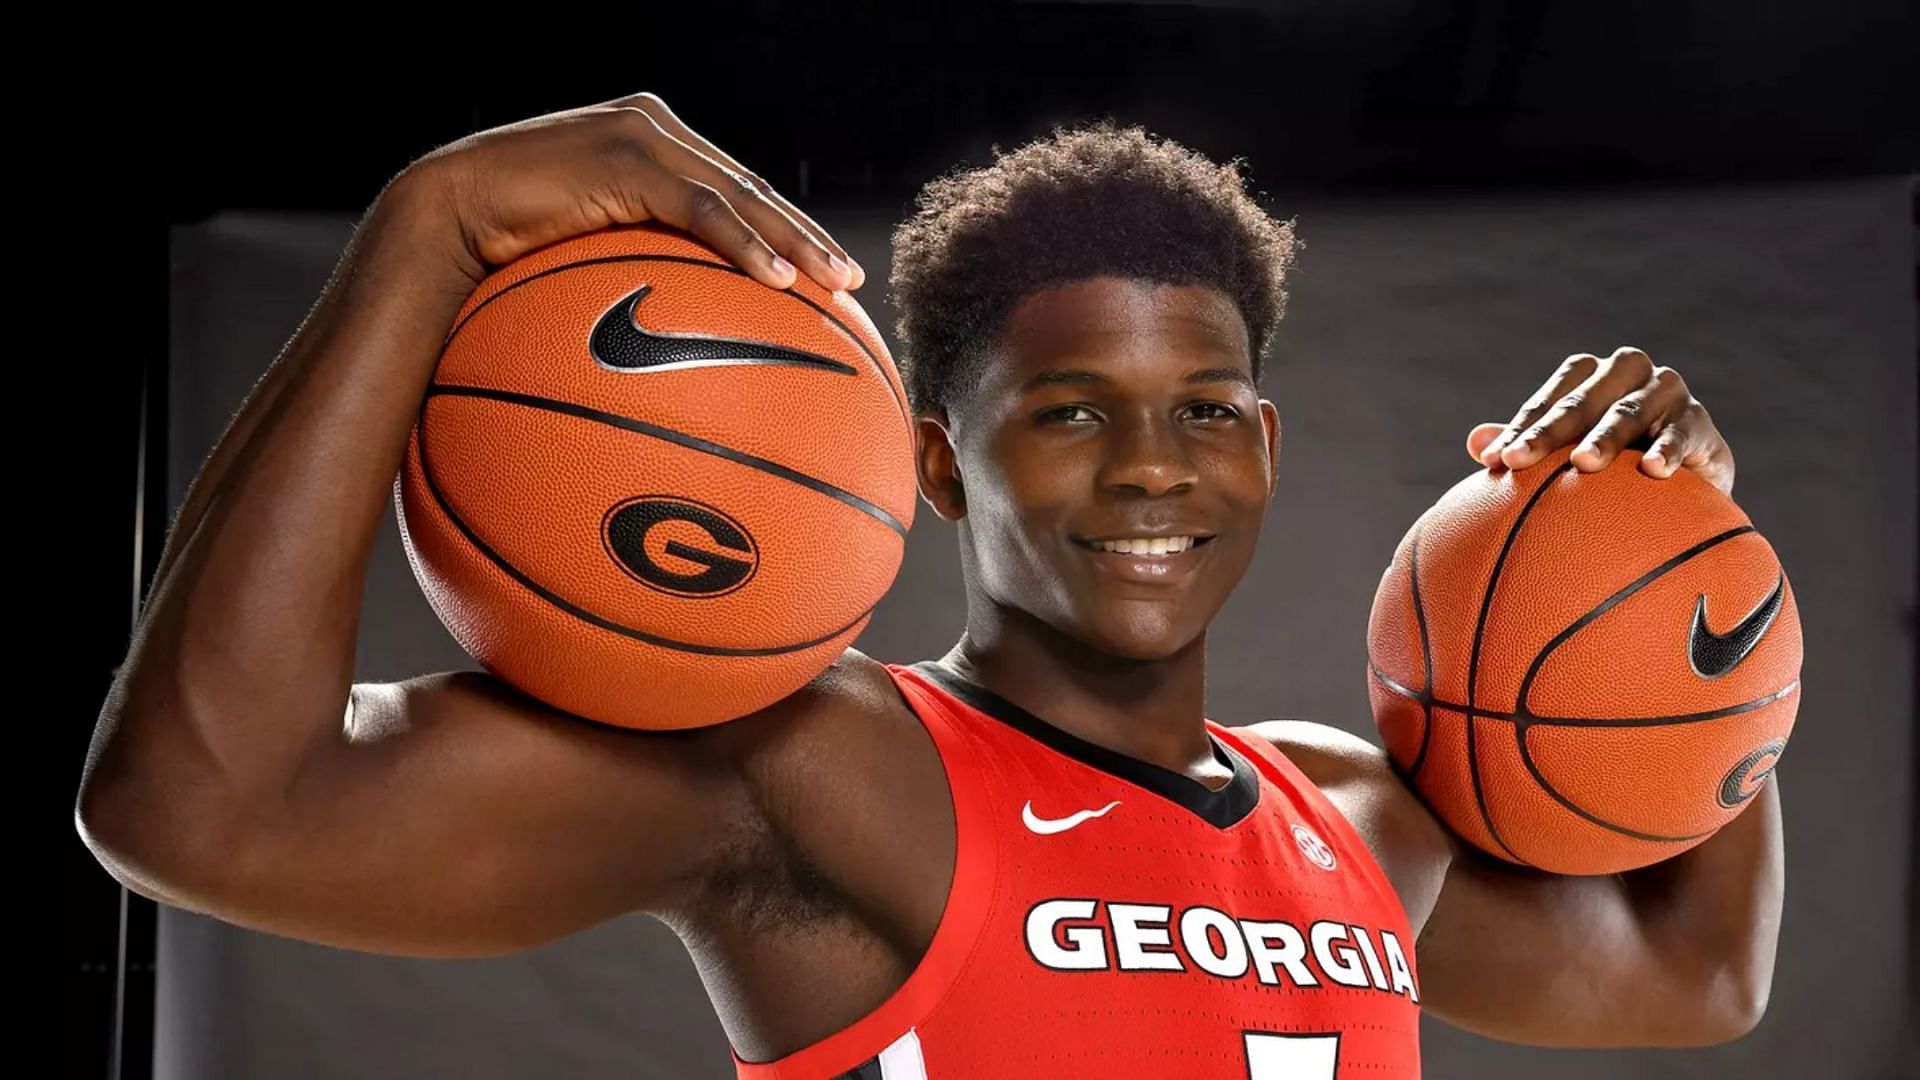 Anthony Edwards averaged 19.1 ppg, 5.2 rpg, 2.8 apg and 1.3 spg in his lone season with Georgia.